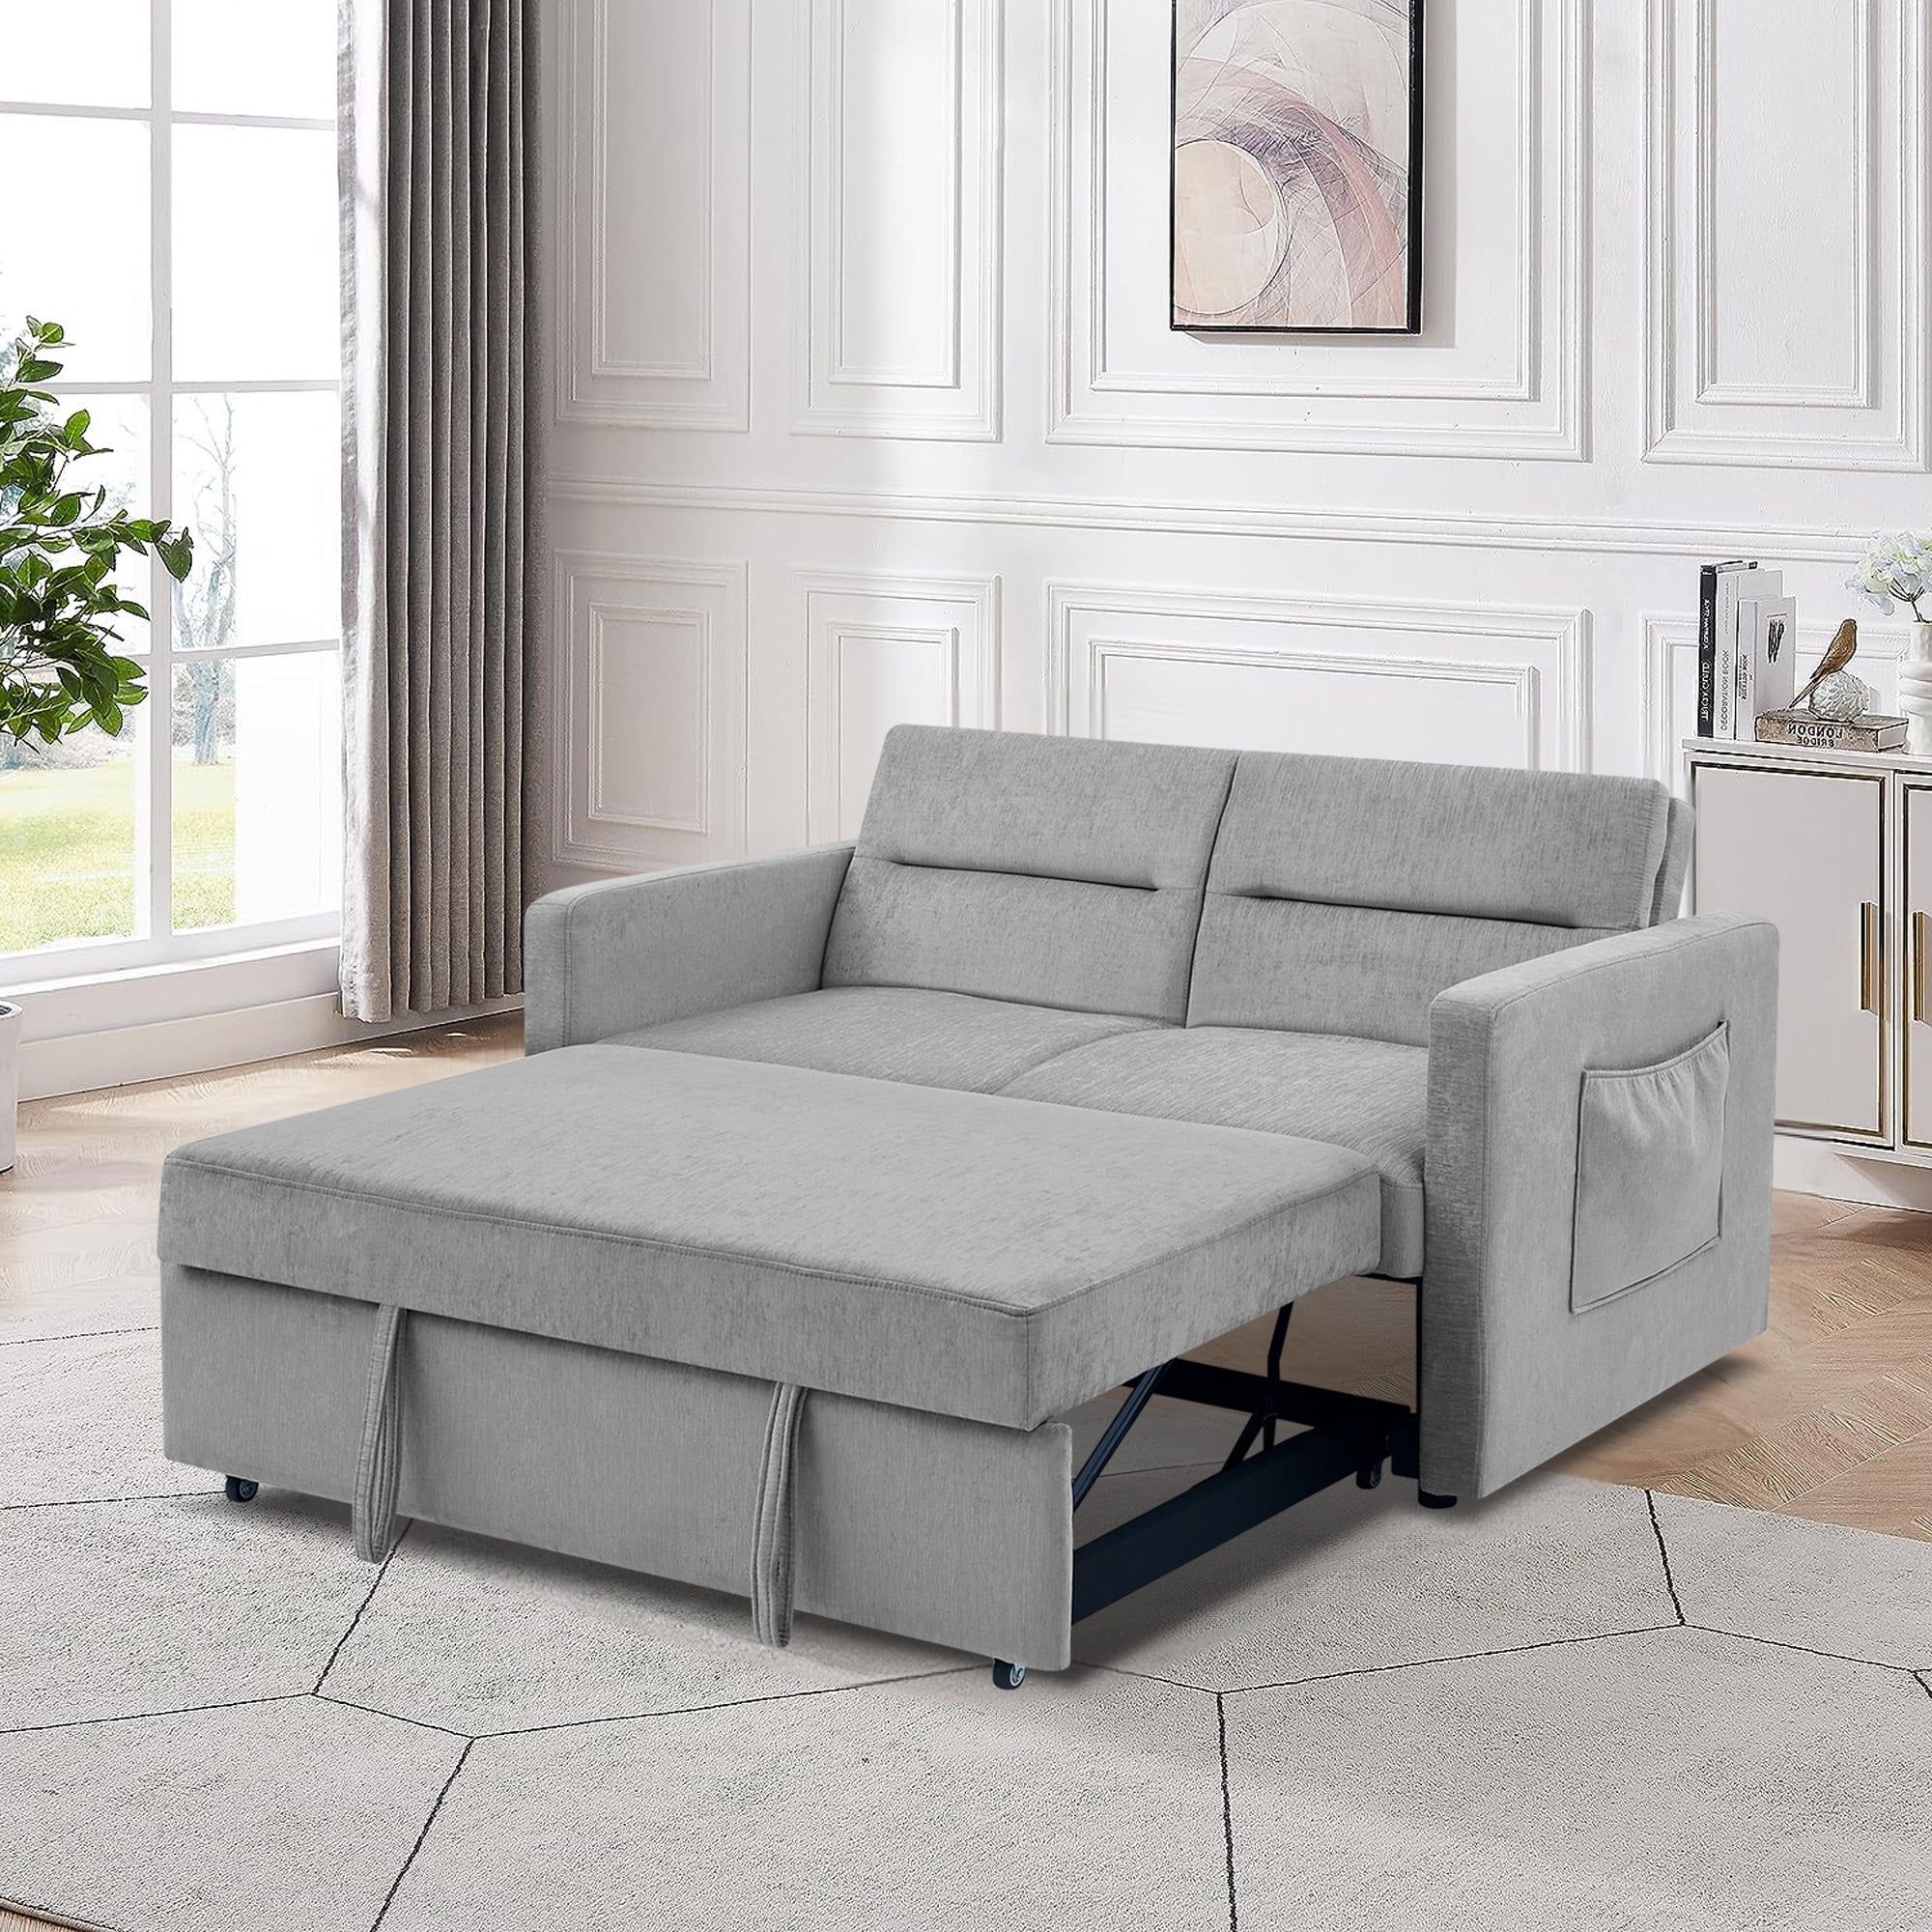 Momspeace Futon Sofa Bed With Pull Out Convertible Bed Sleeper Sofa Couch  Adjustable Back Loveseat For Living Room – Gray – Walmart Intended For Convertible Gray Loveseat Sleepers (View 15 of 15)